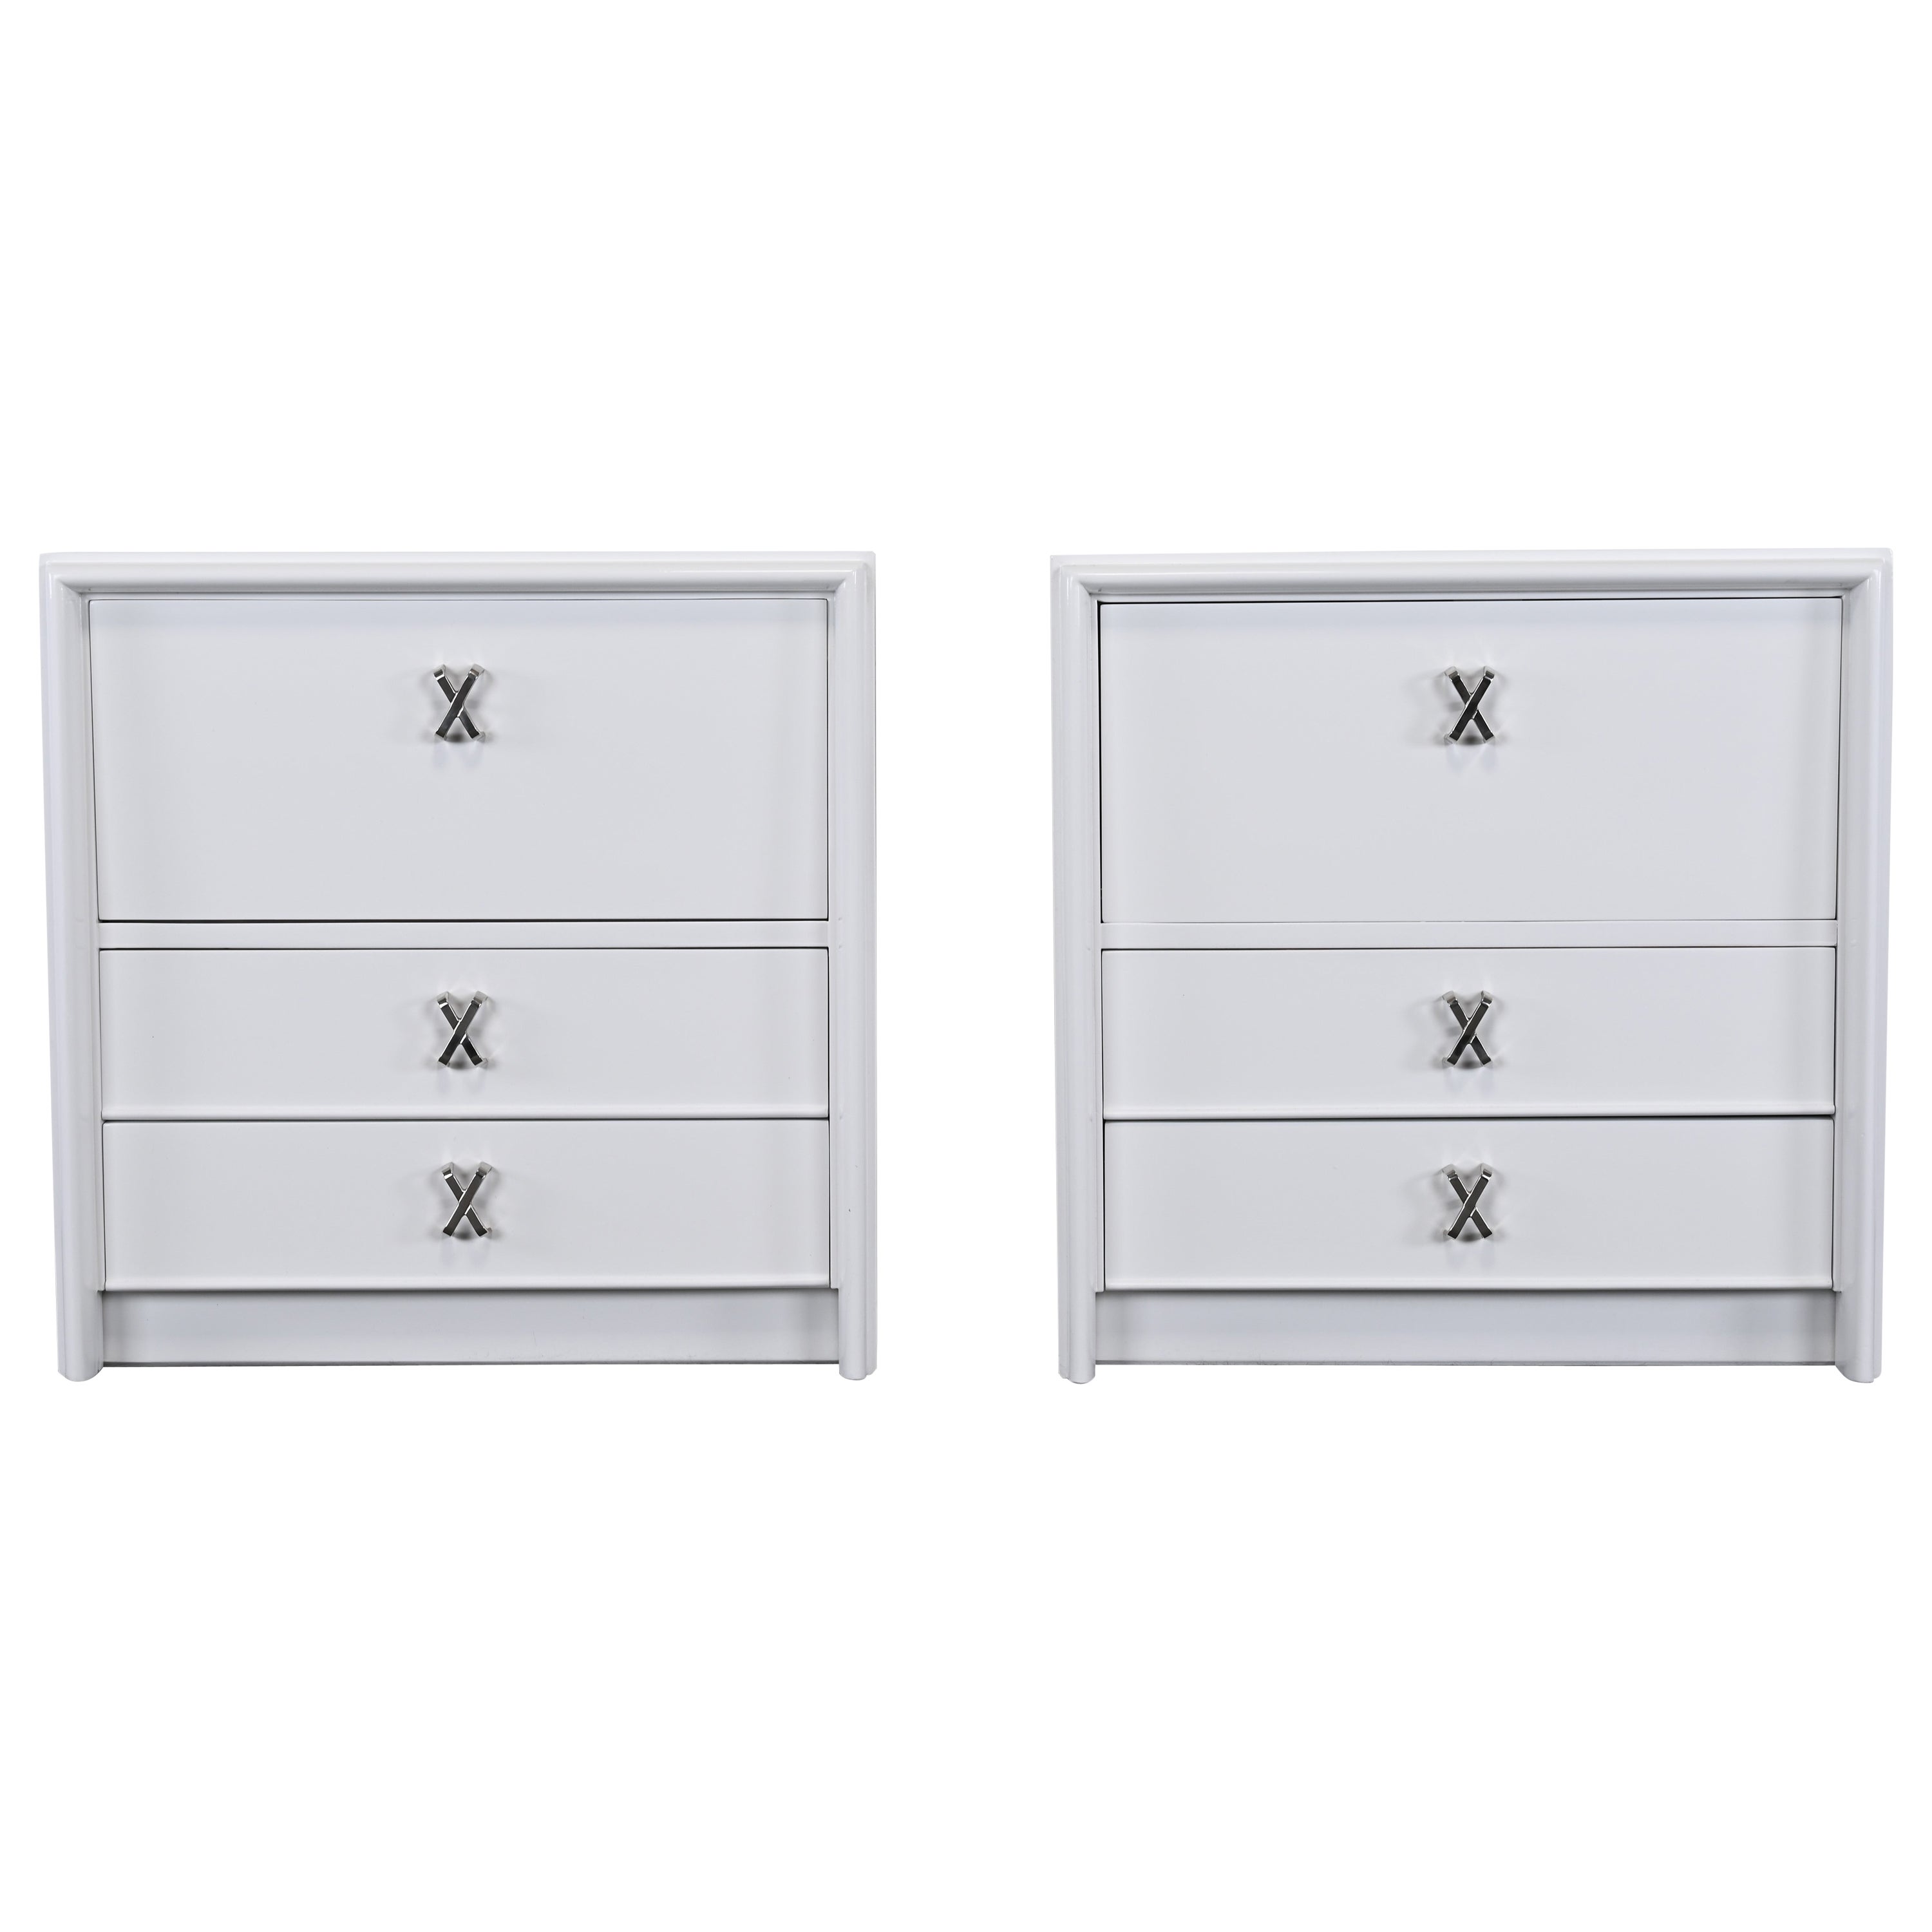 Pair of Bedside Tables with Silver X-Pulls by Paul Frankl, 1950